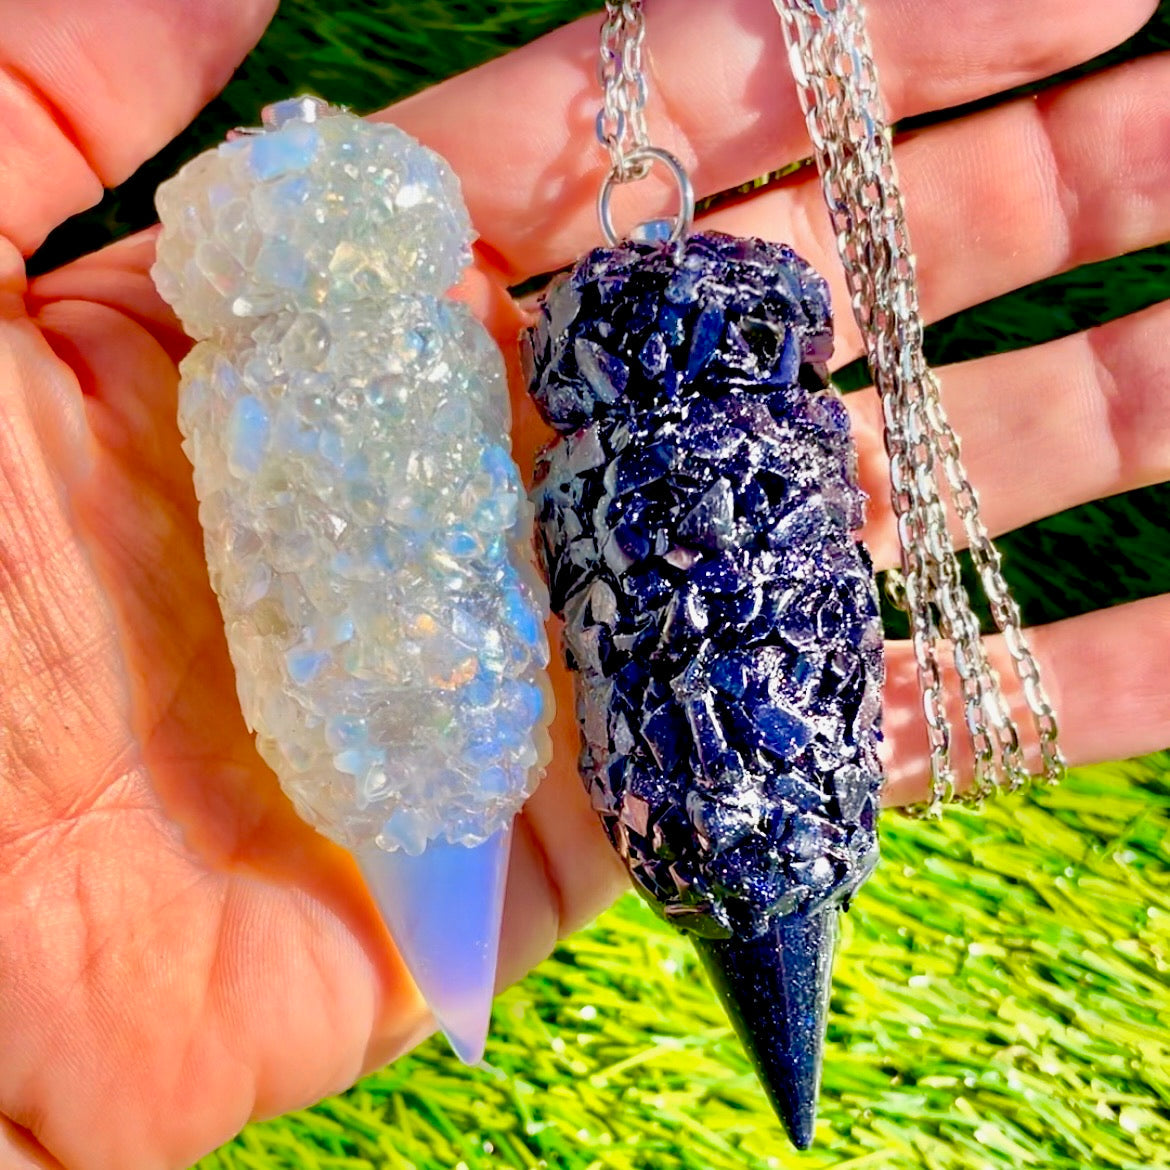 Crystal Stash Necklace With Spoon